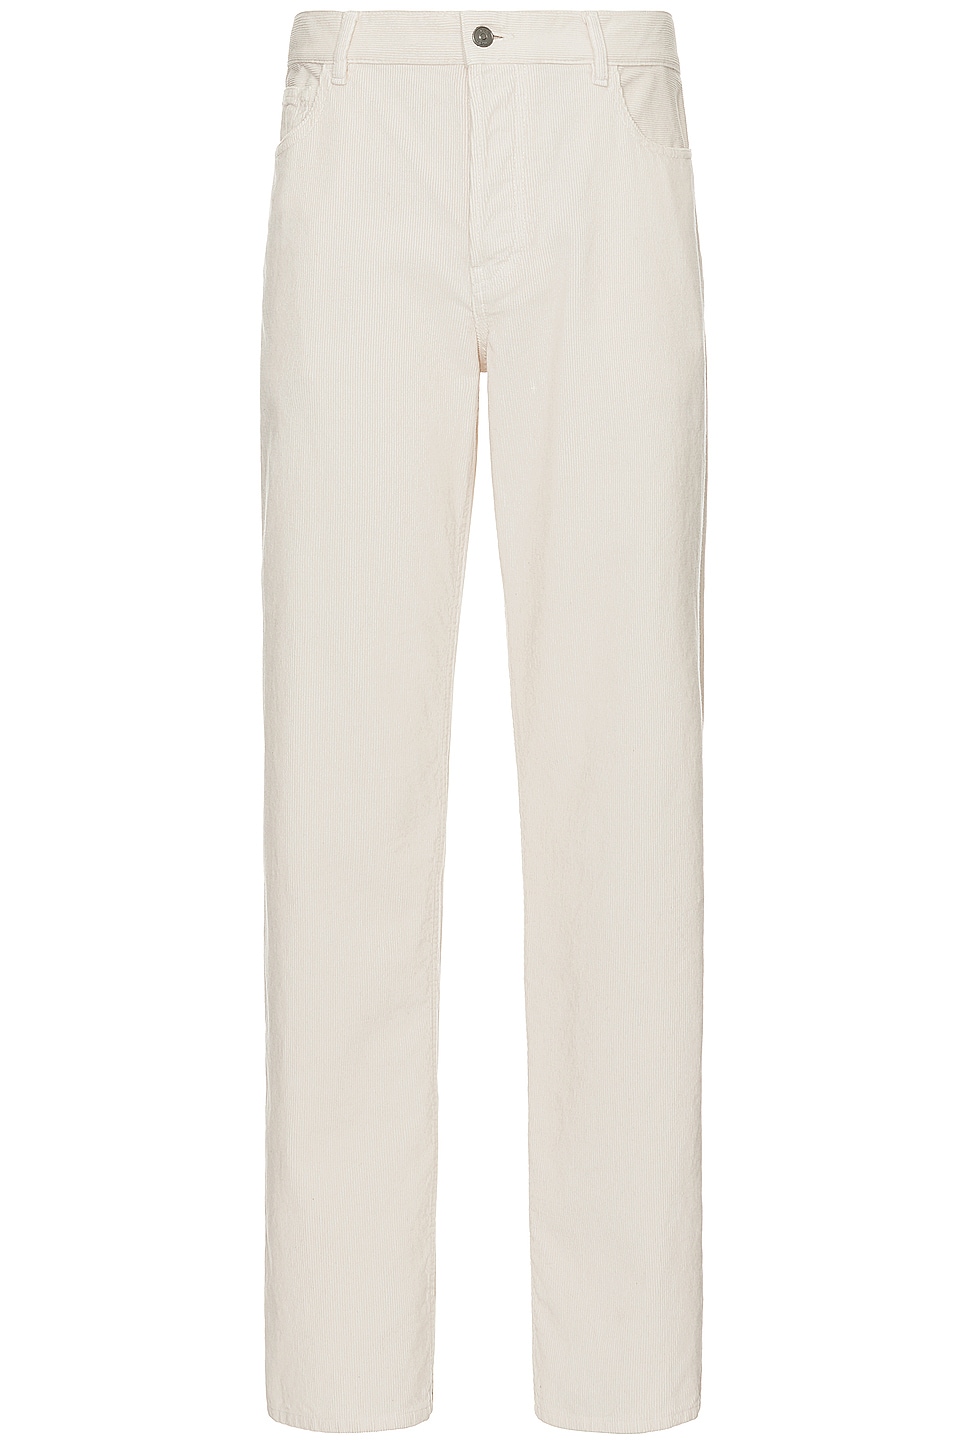 Image 1 of The Row Ross Pant in Off White